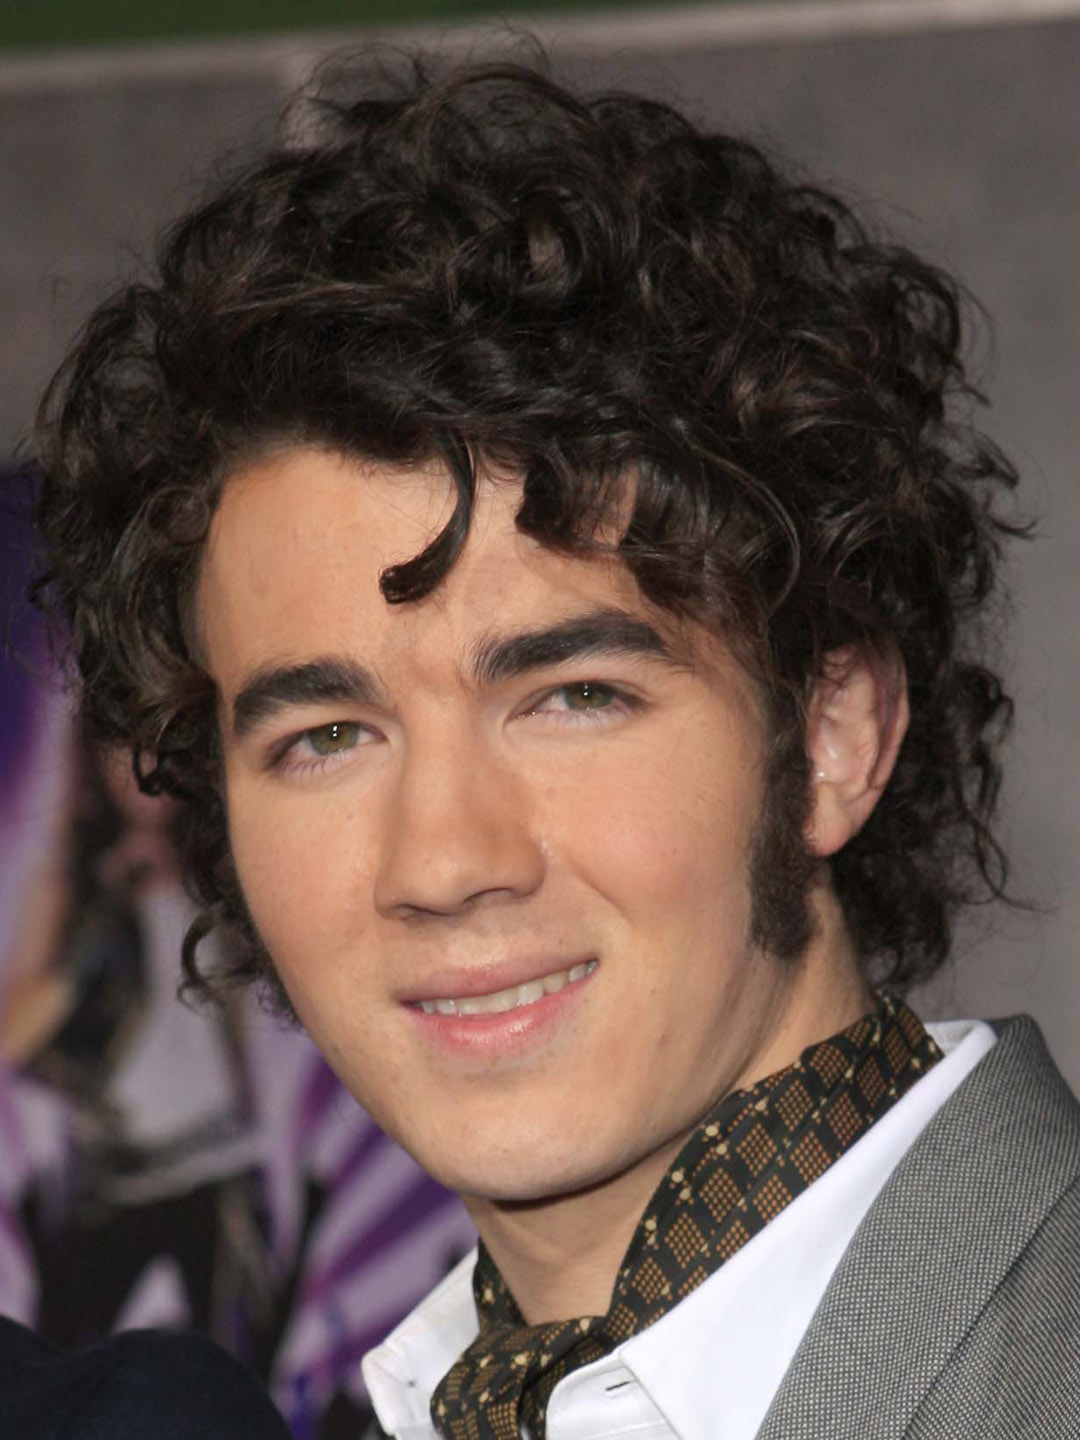 How tall is Kevin Jonas?